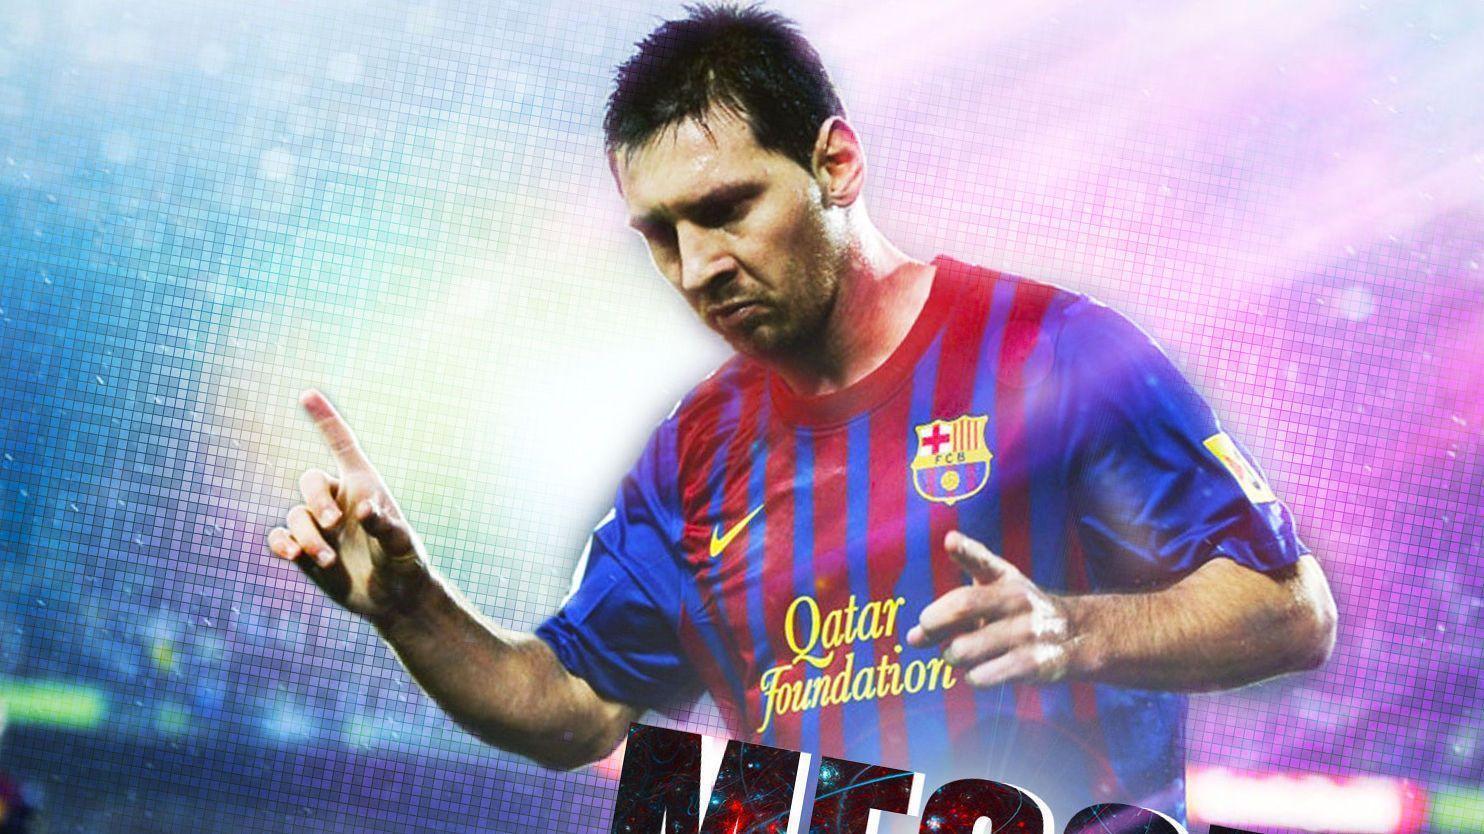 fcb lionel messi 2014 2015 2016 2017 - Image And Wallpaper